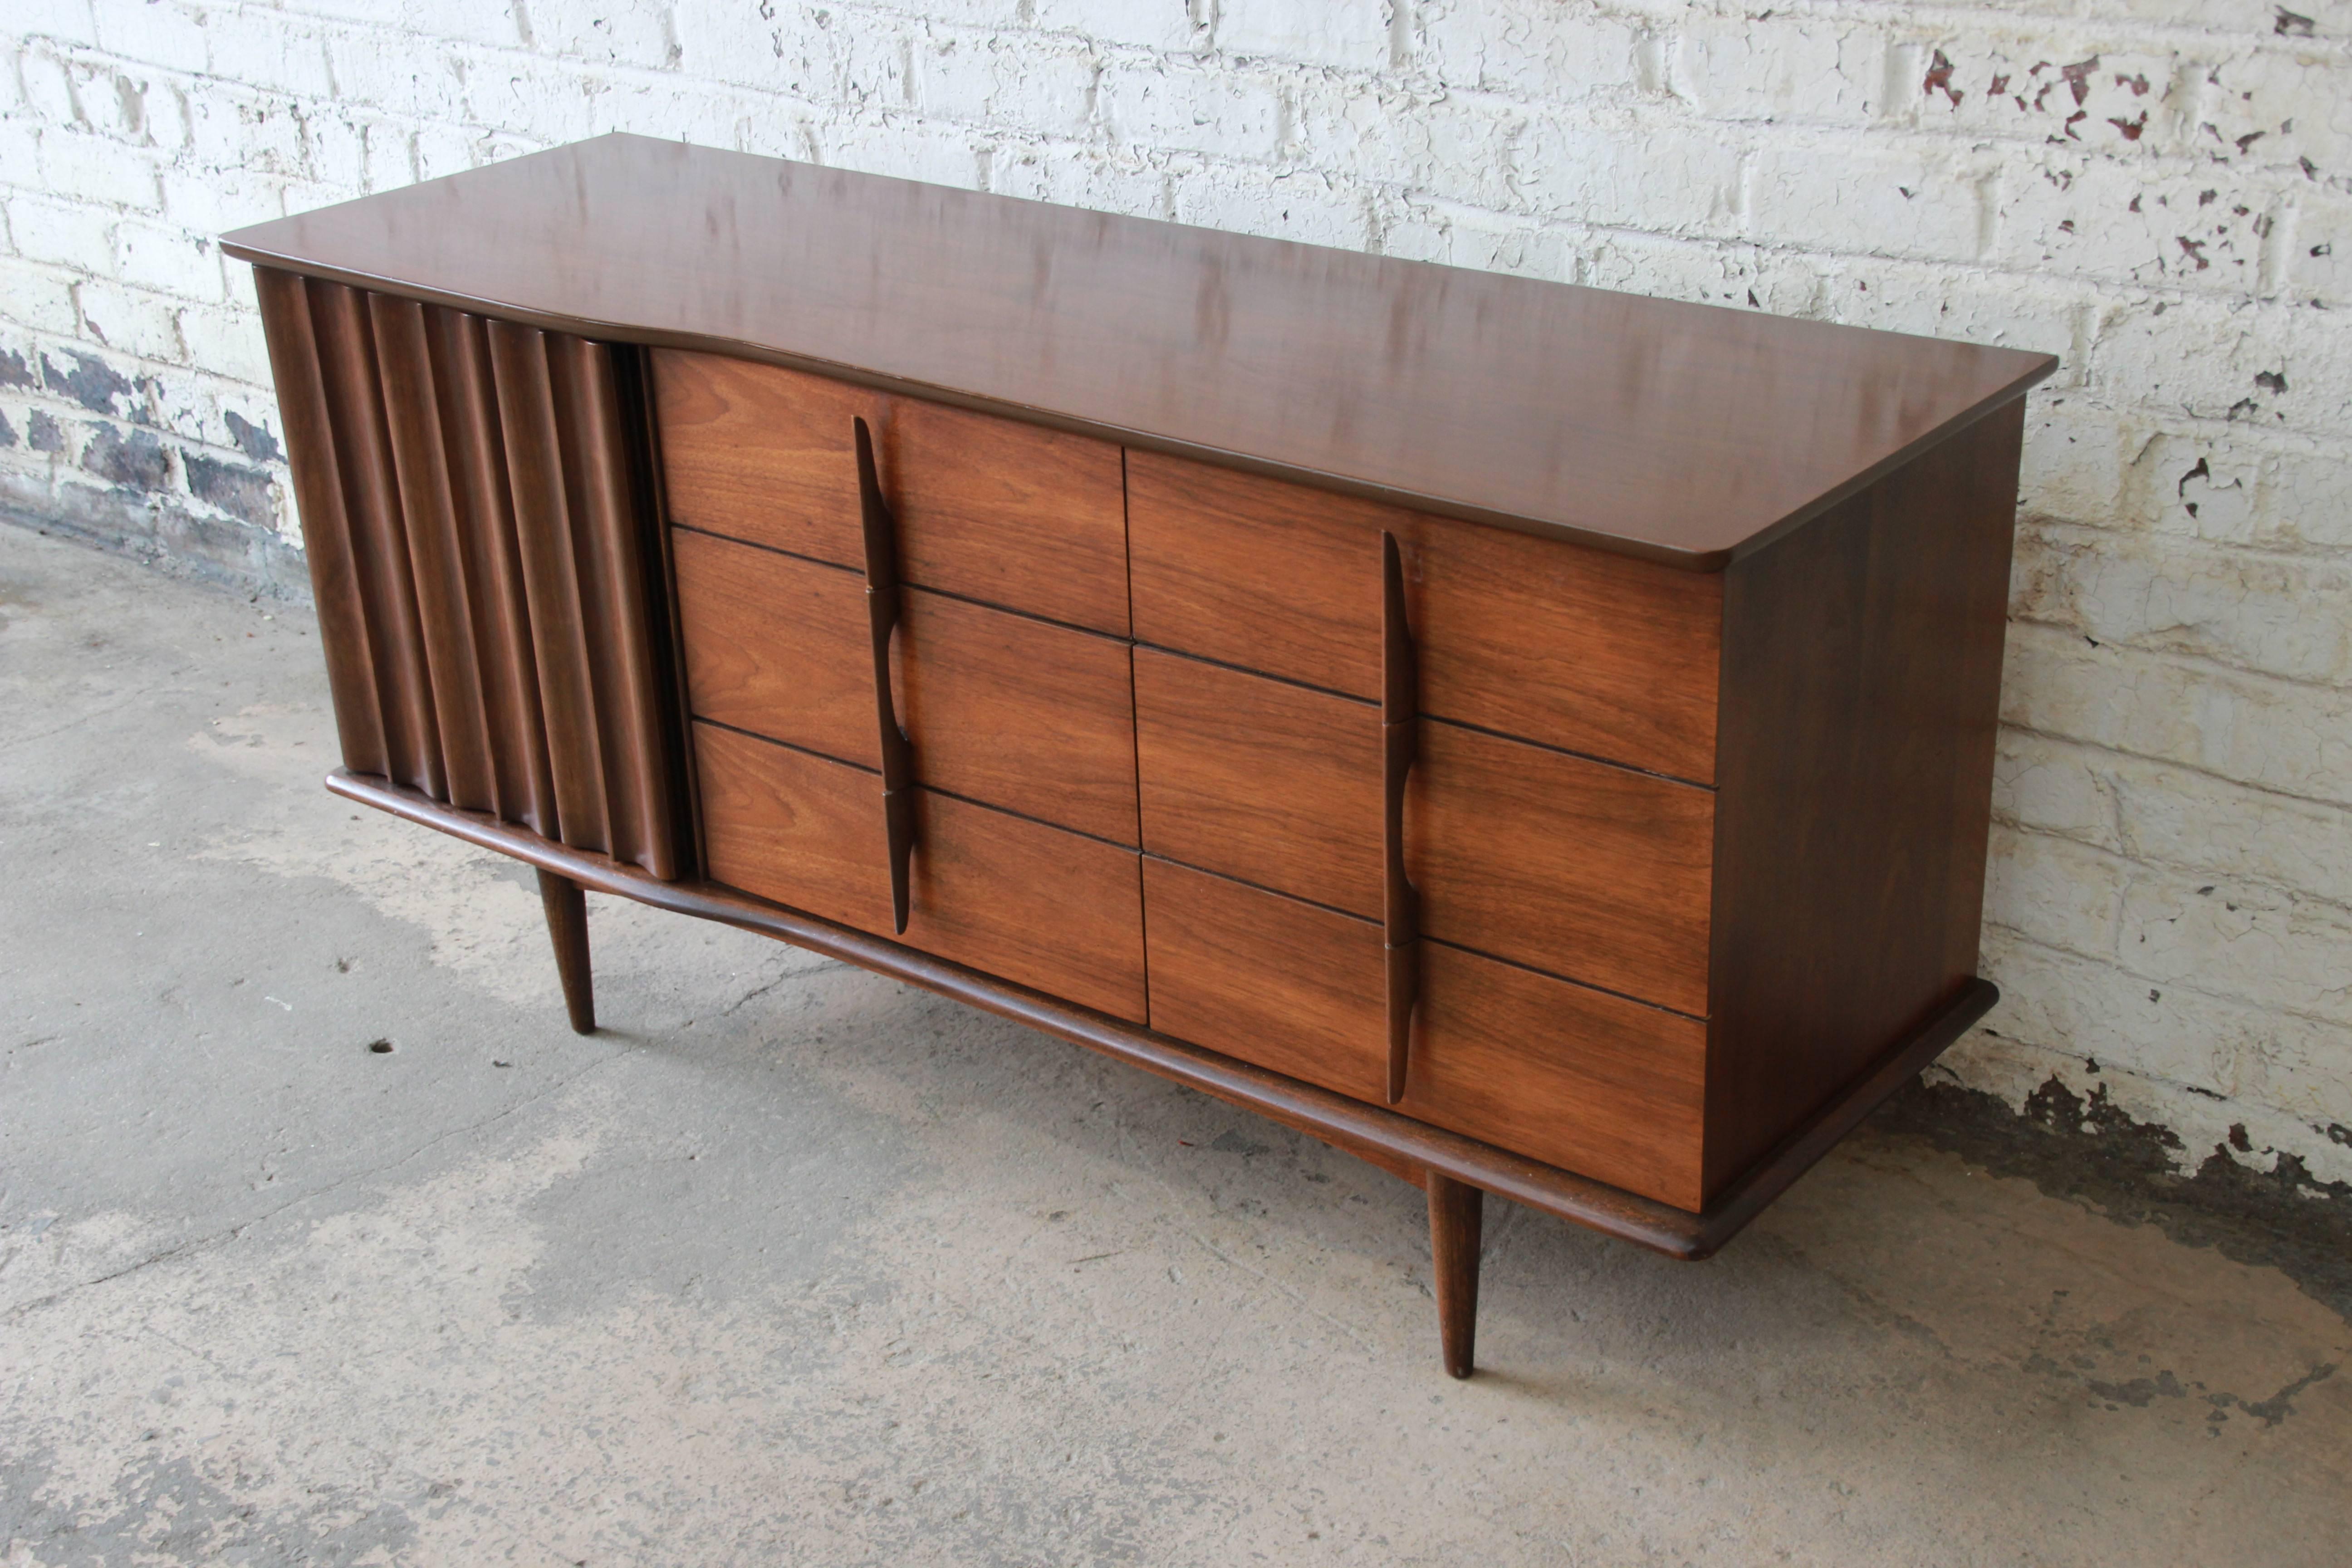 American Mid-Century Modern Sculpted Walnut Triple Dresser or Credenza by United, 1960s